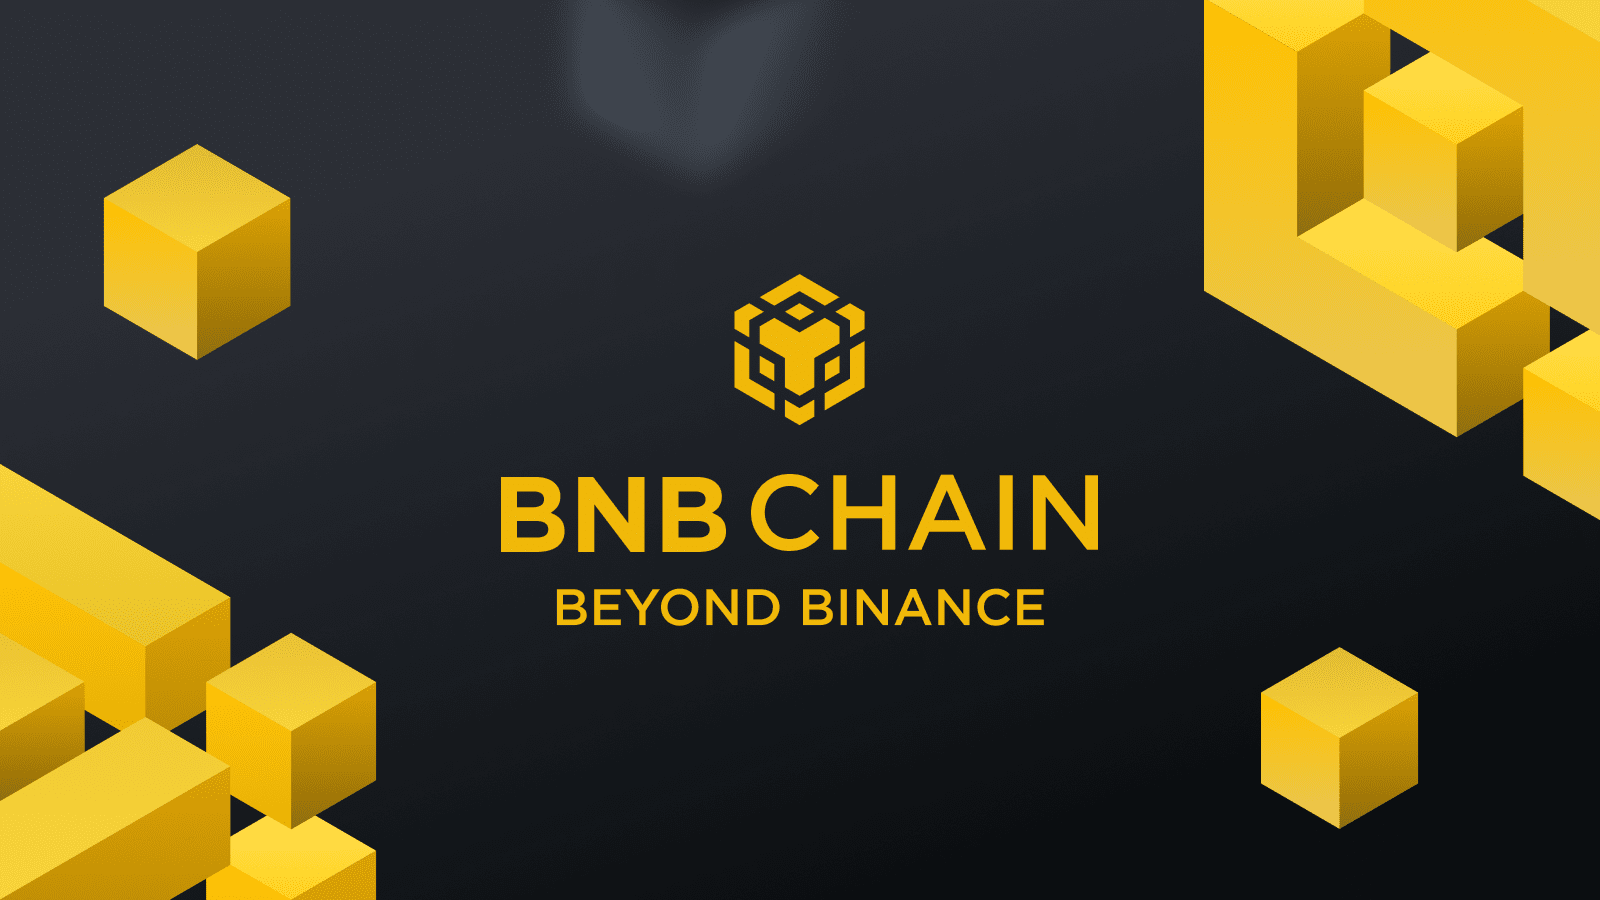 What is BNB and how create a token on BSC network